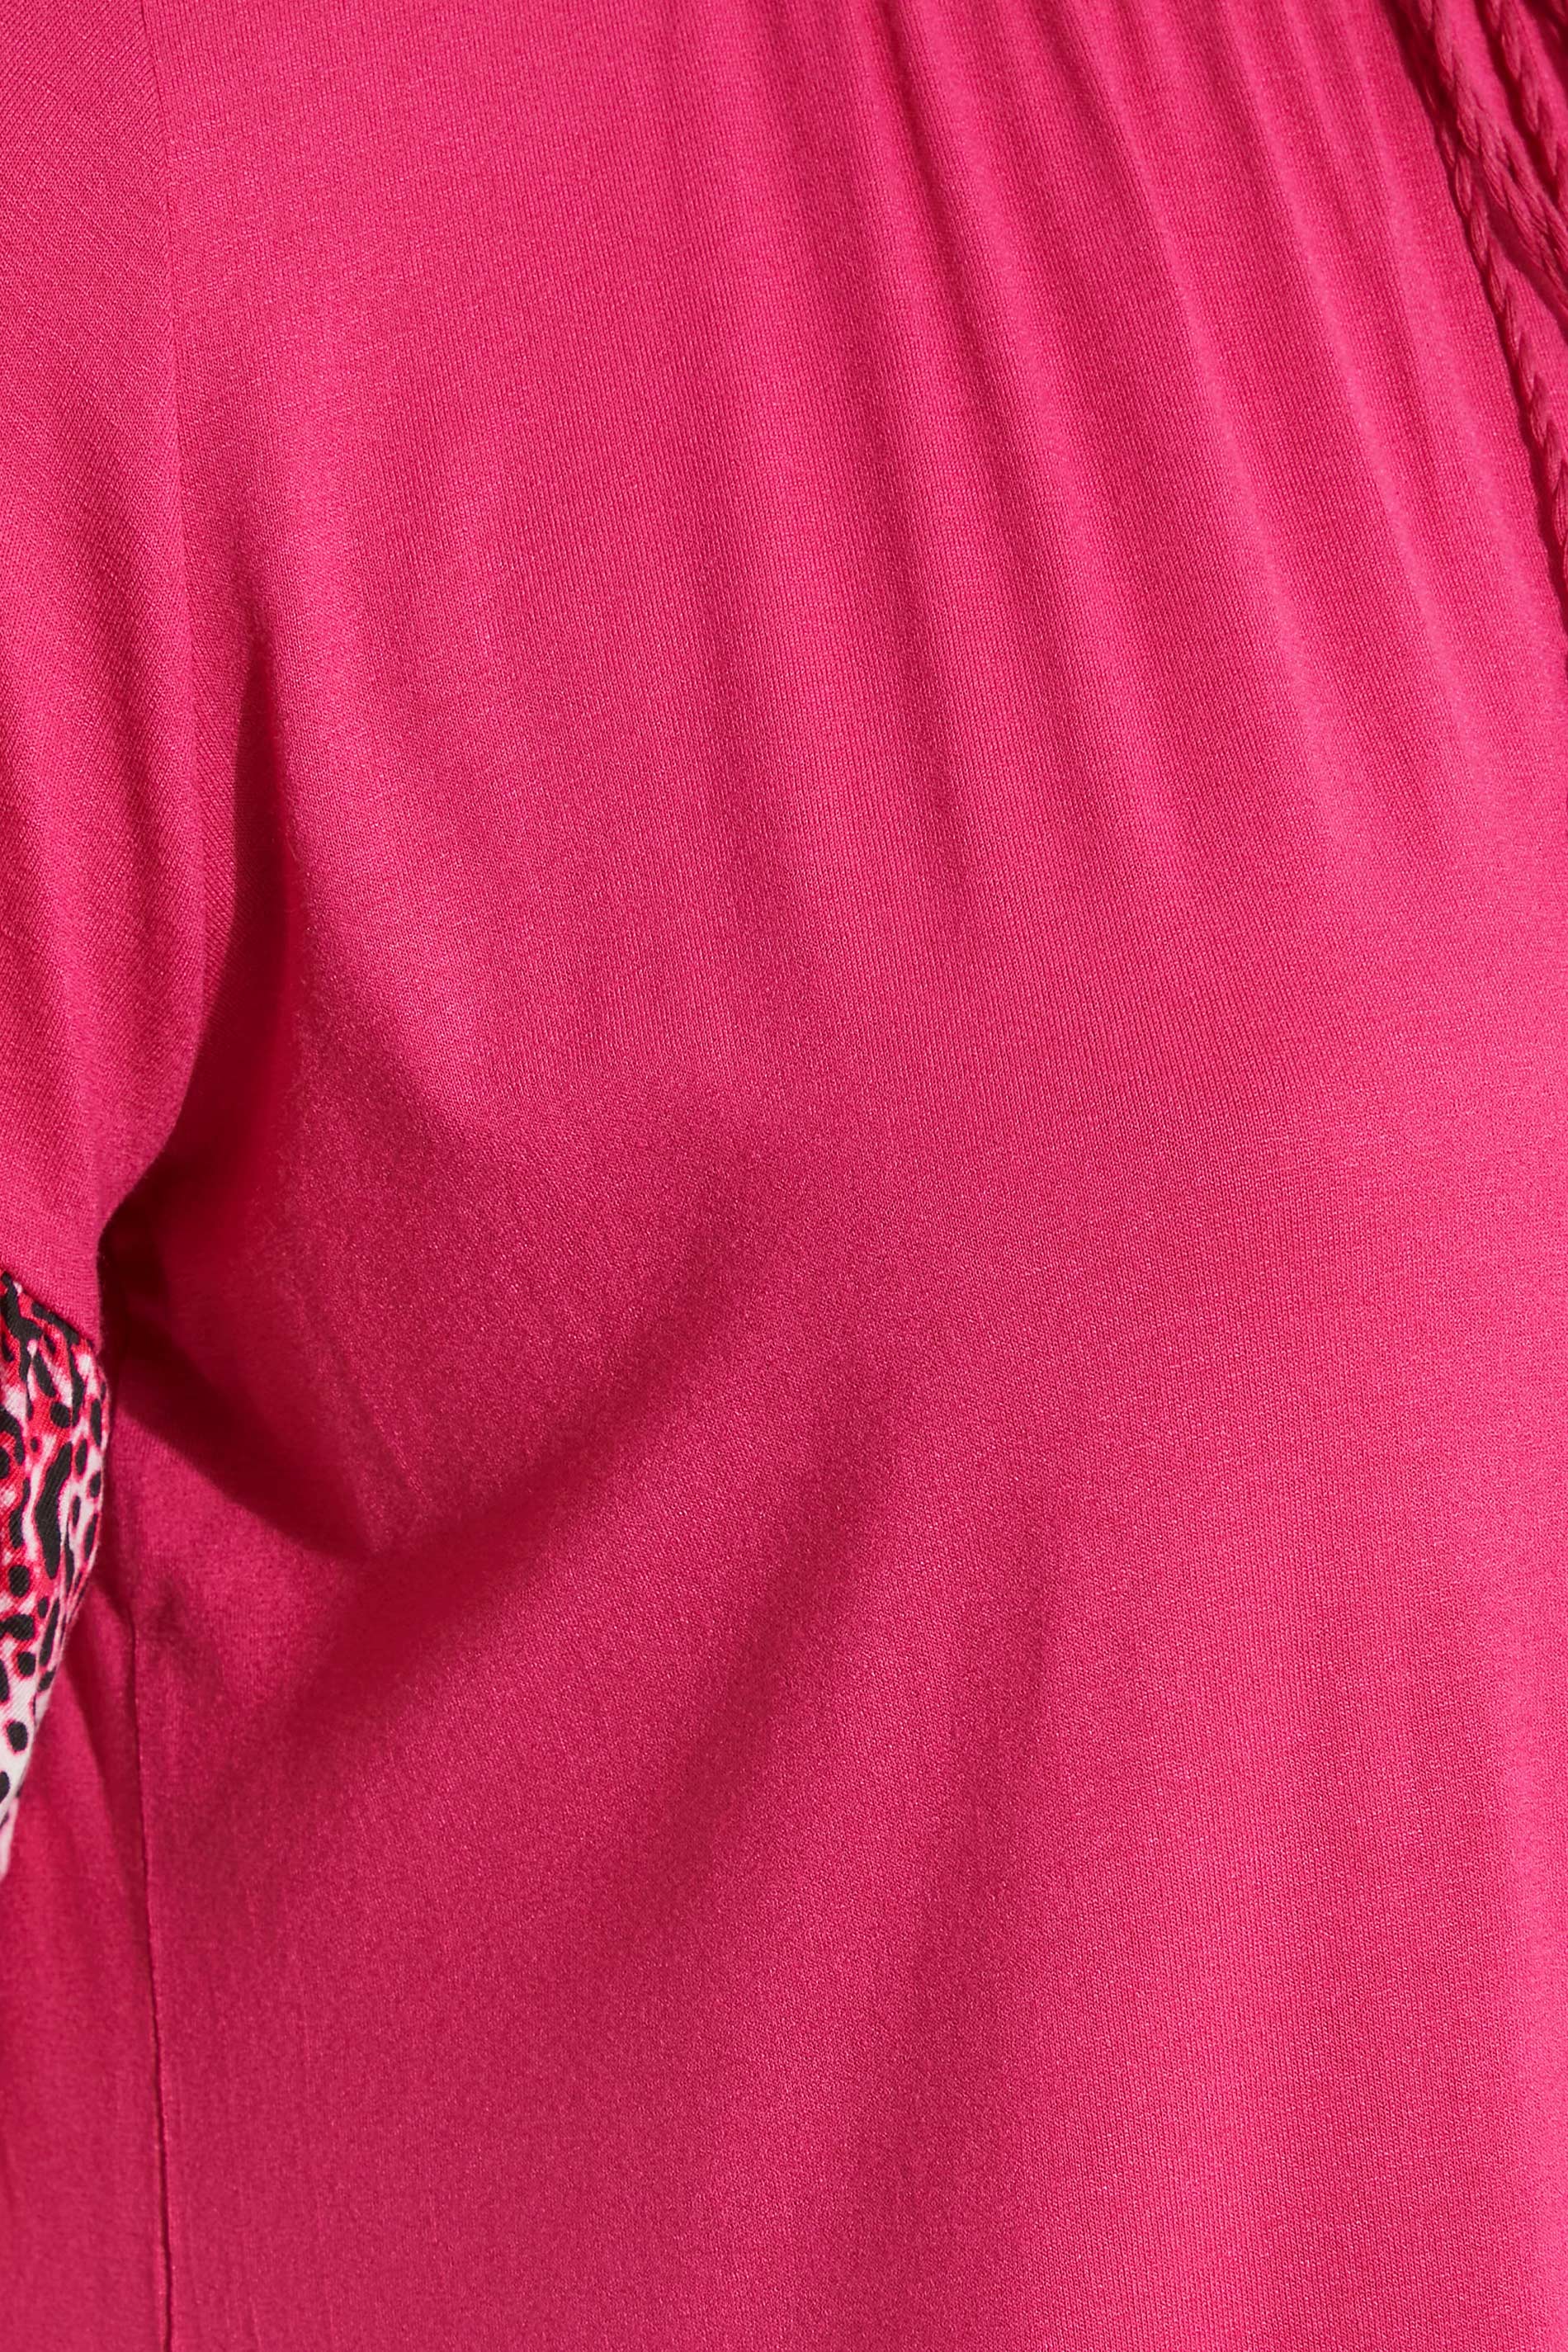 Grande taille  Tops Grande taille  Tuniques | Curve Pink Animal Print Contrast Trim Tunic Top - DN25305